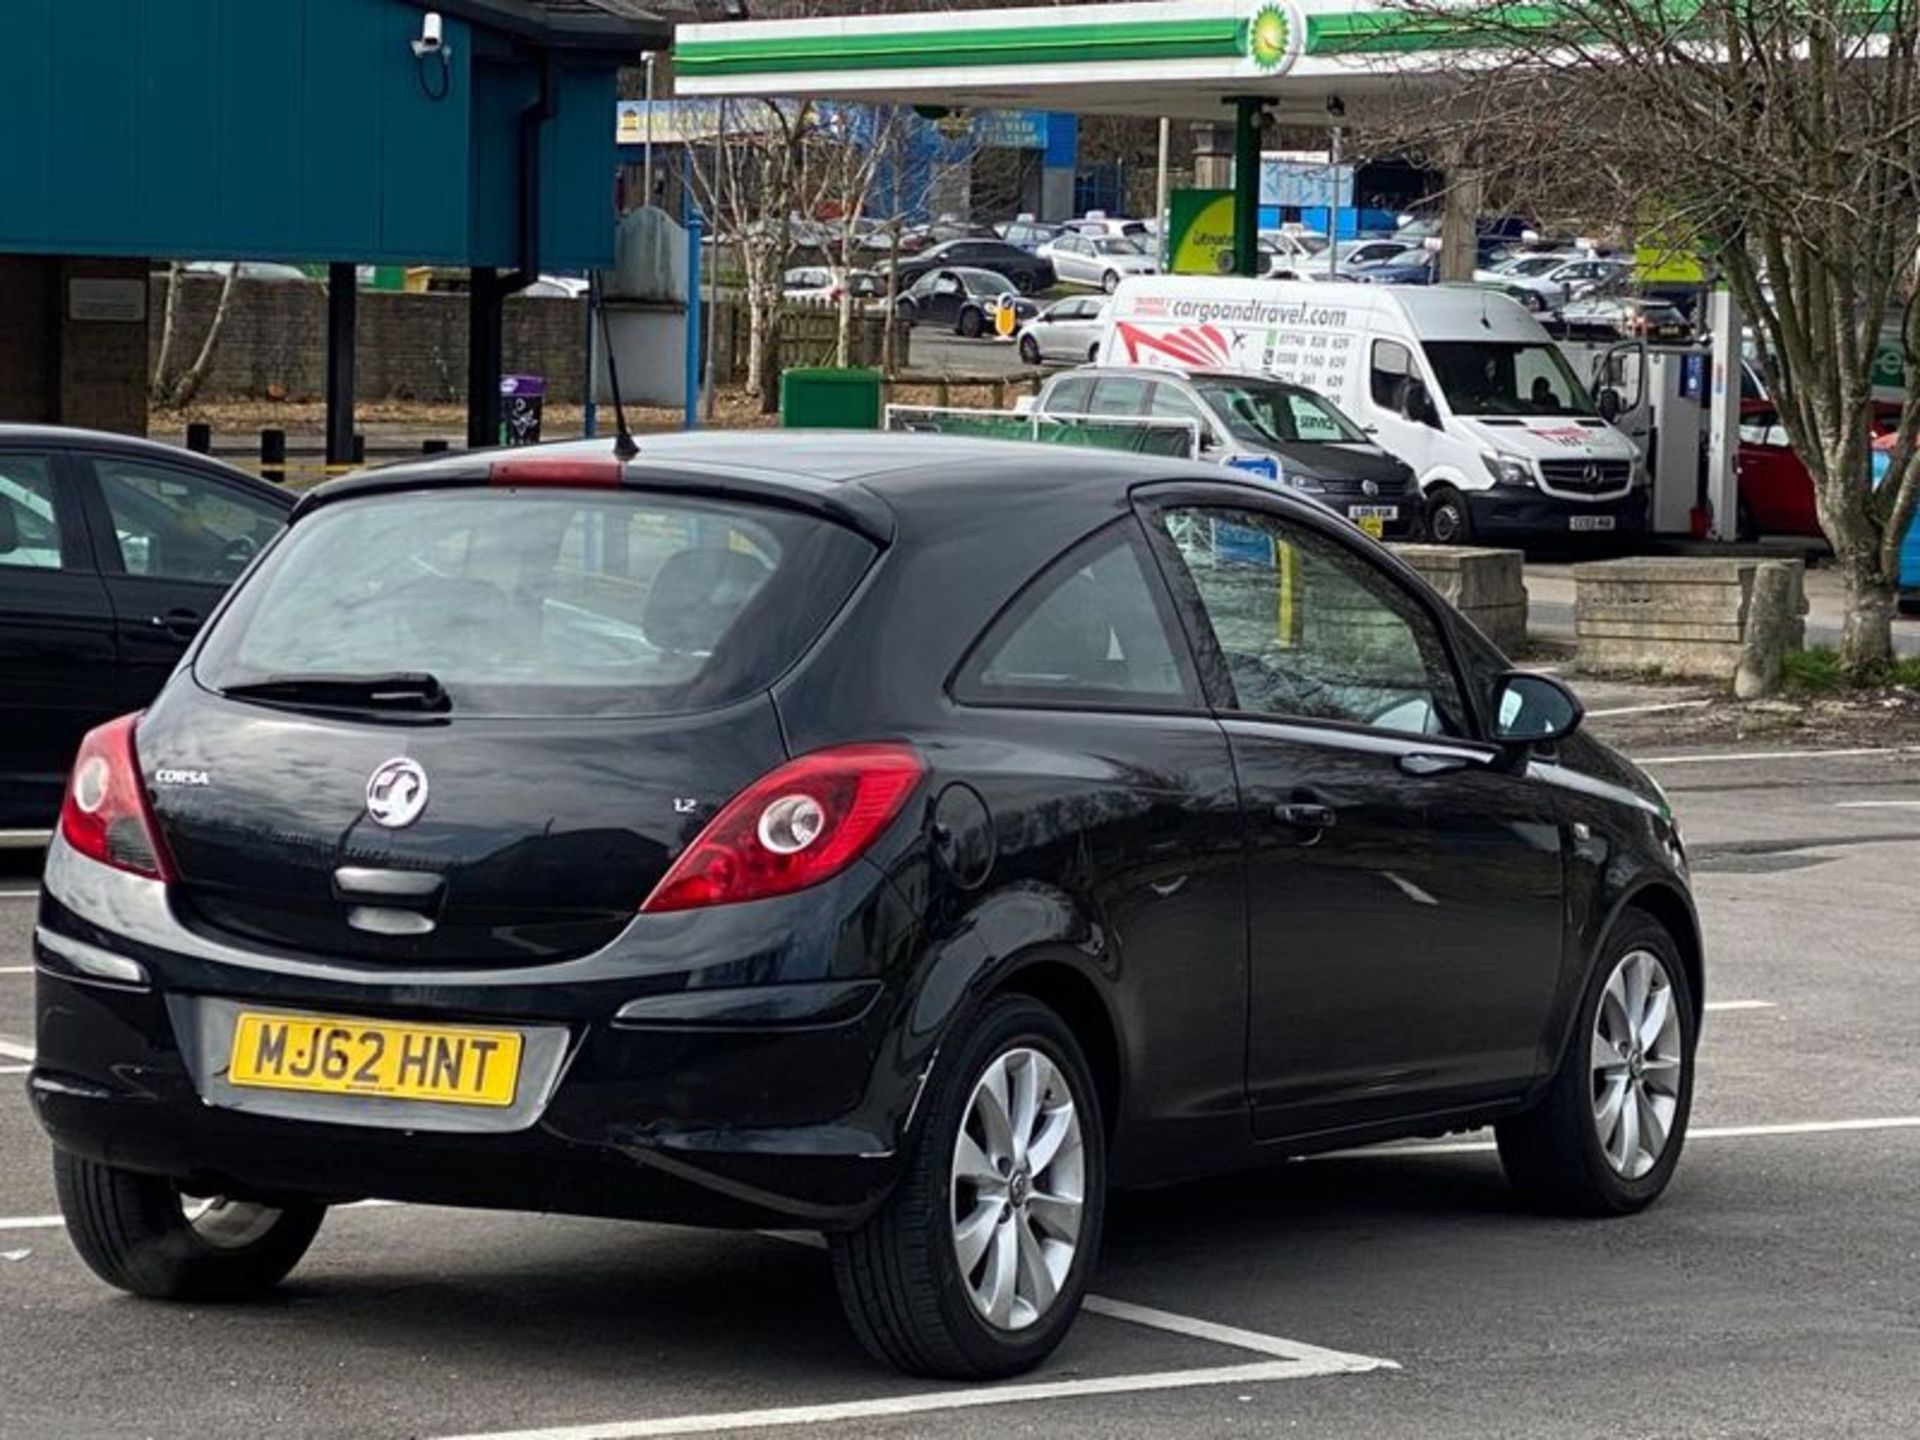 VAUXHALL CORSA 1.2 16V ACTIVE EURO 5 3DR (A/C) 2012 (62 REG) (SPARE OR REPARE) - Image 6 of 28